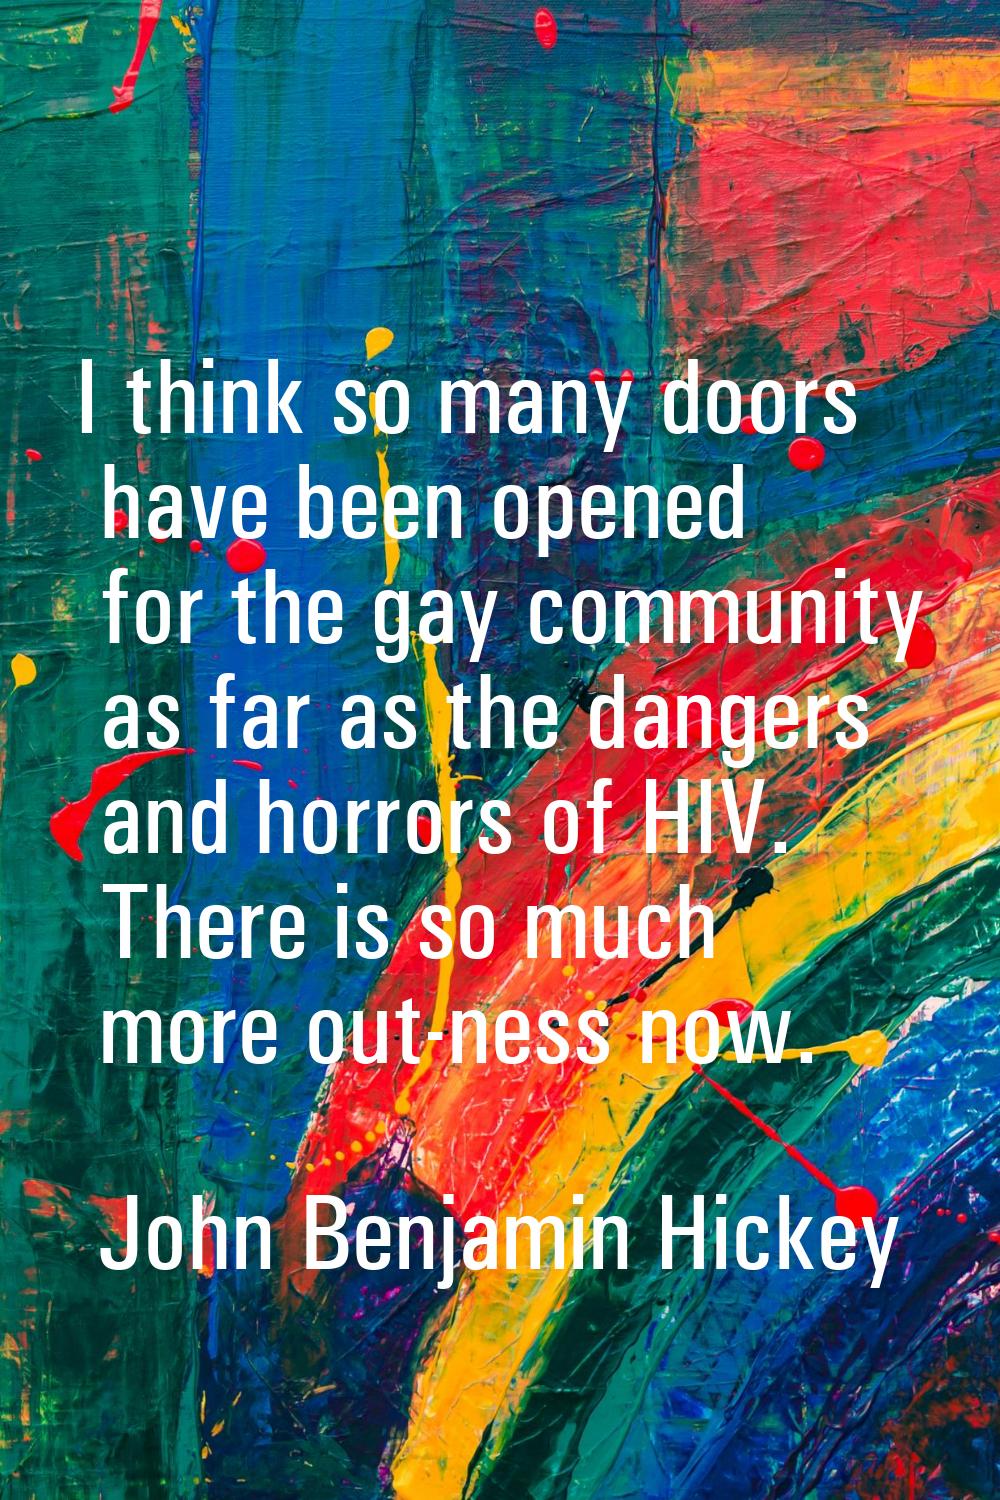 I think so many doors have been opened for the gay community as far as the dangers and horrors of H